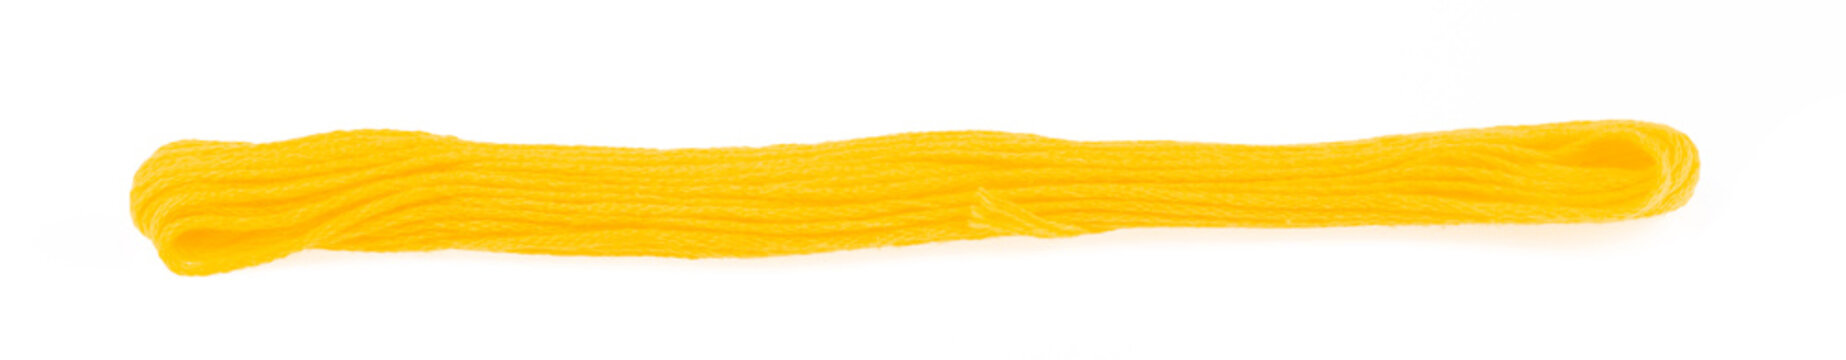 Close up yellow yarn thread isolated on white background